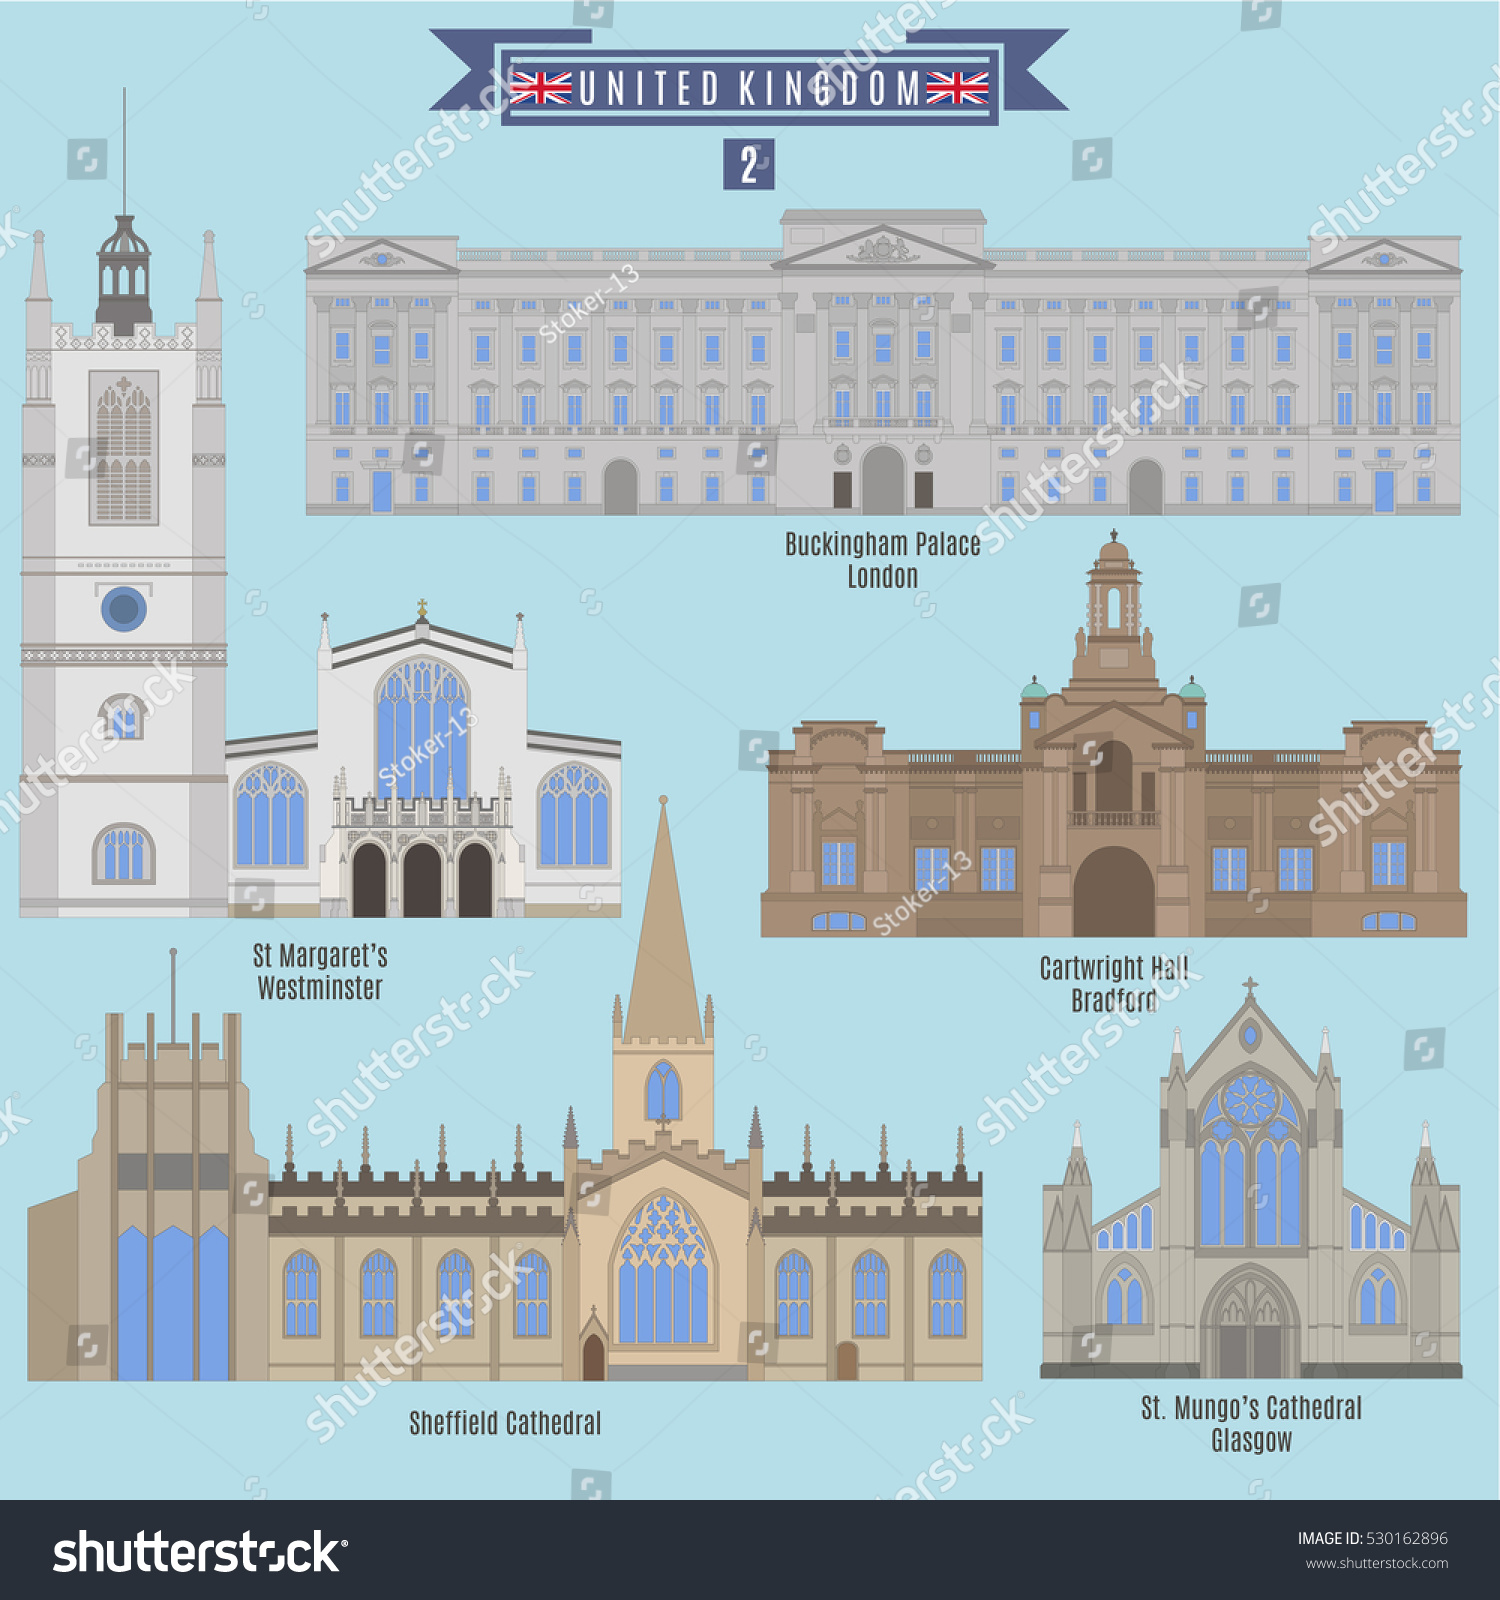 SVG of Famous Places in United Kingdom: Buckingham Palace - London, St. Margarets - Westminster, Cartwright Hall - Bradford, Sheddield Cathedral, St. Mungos Cathedral - Glasgow svg